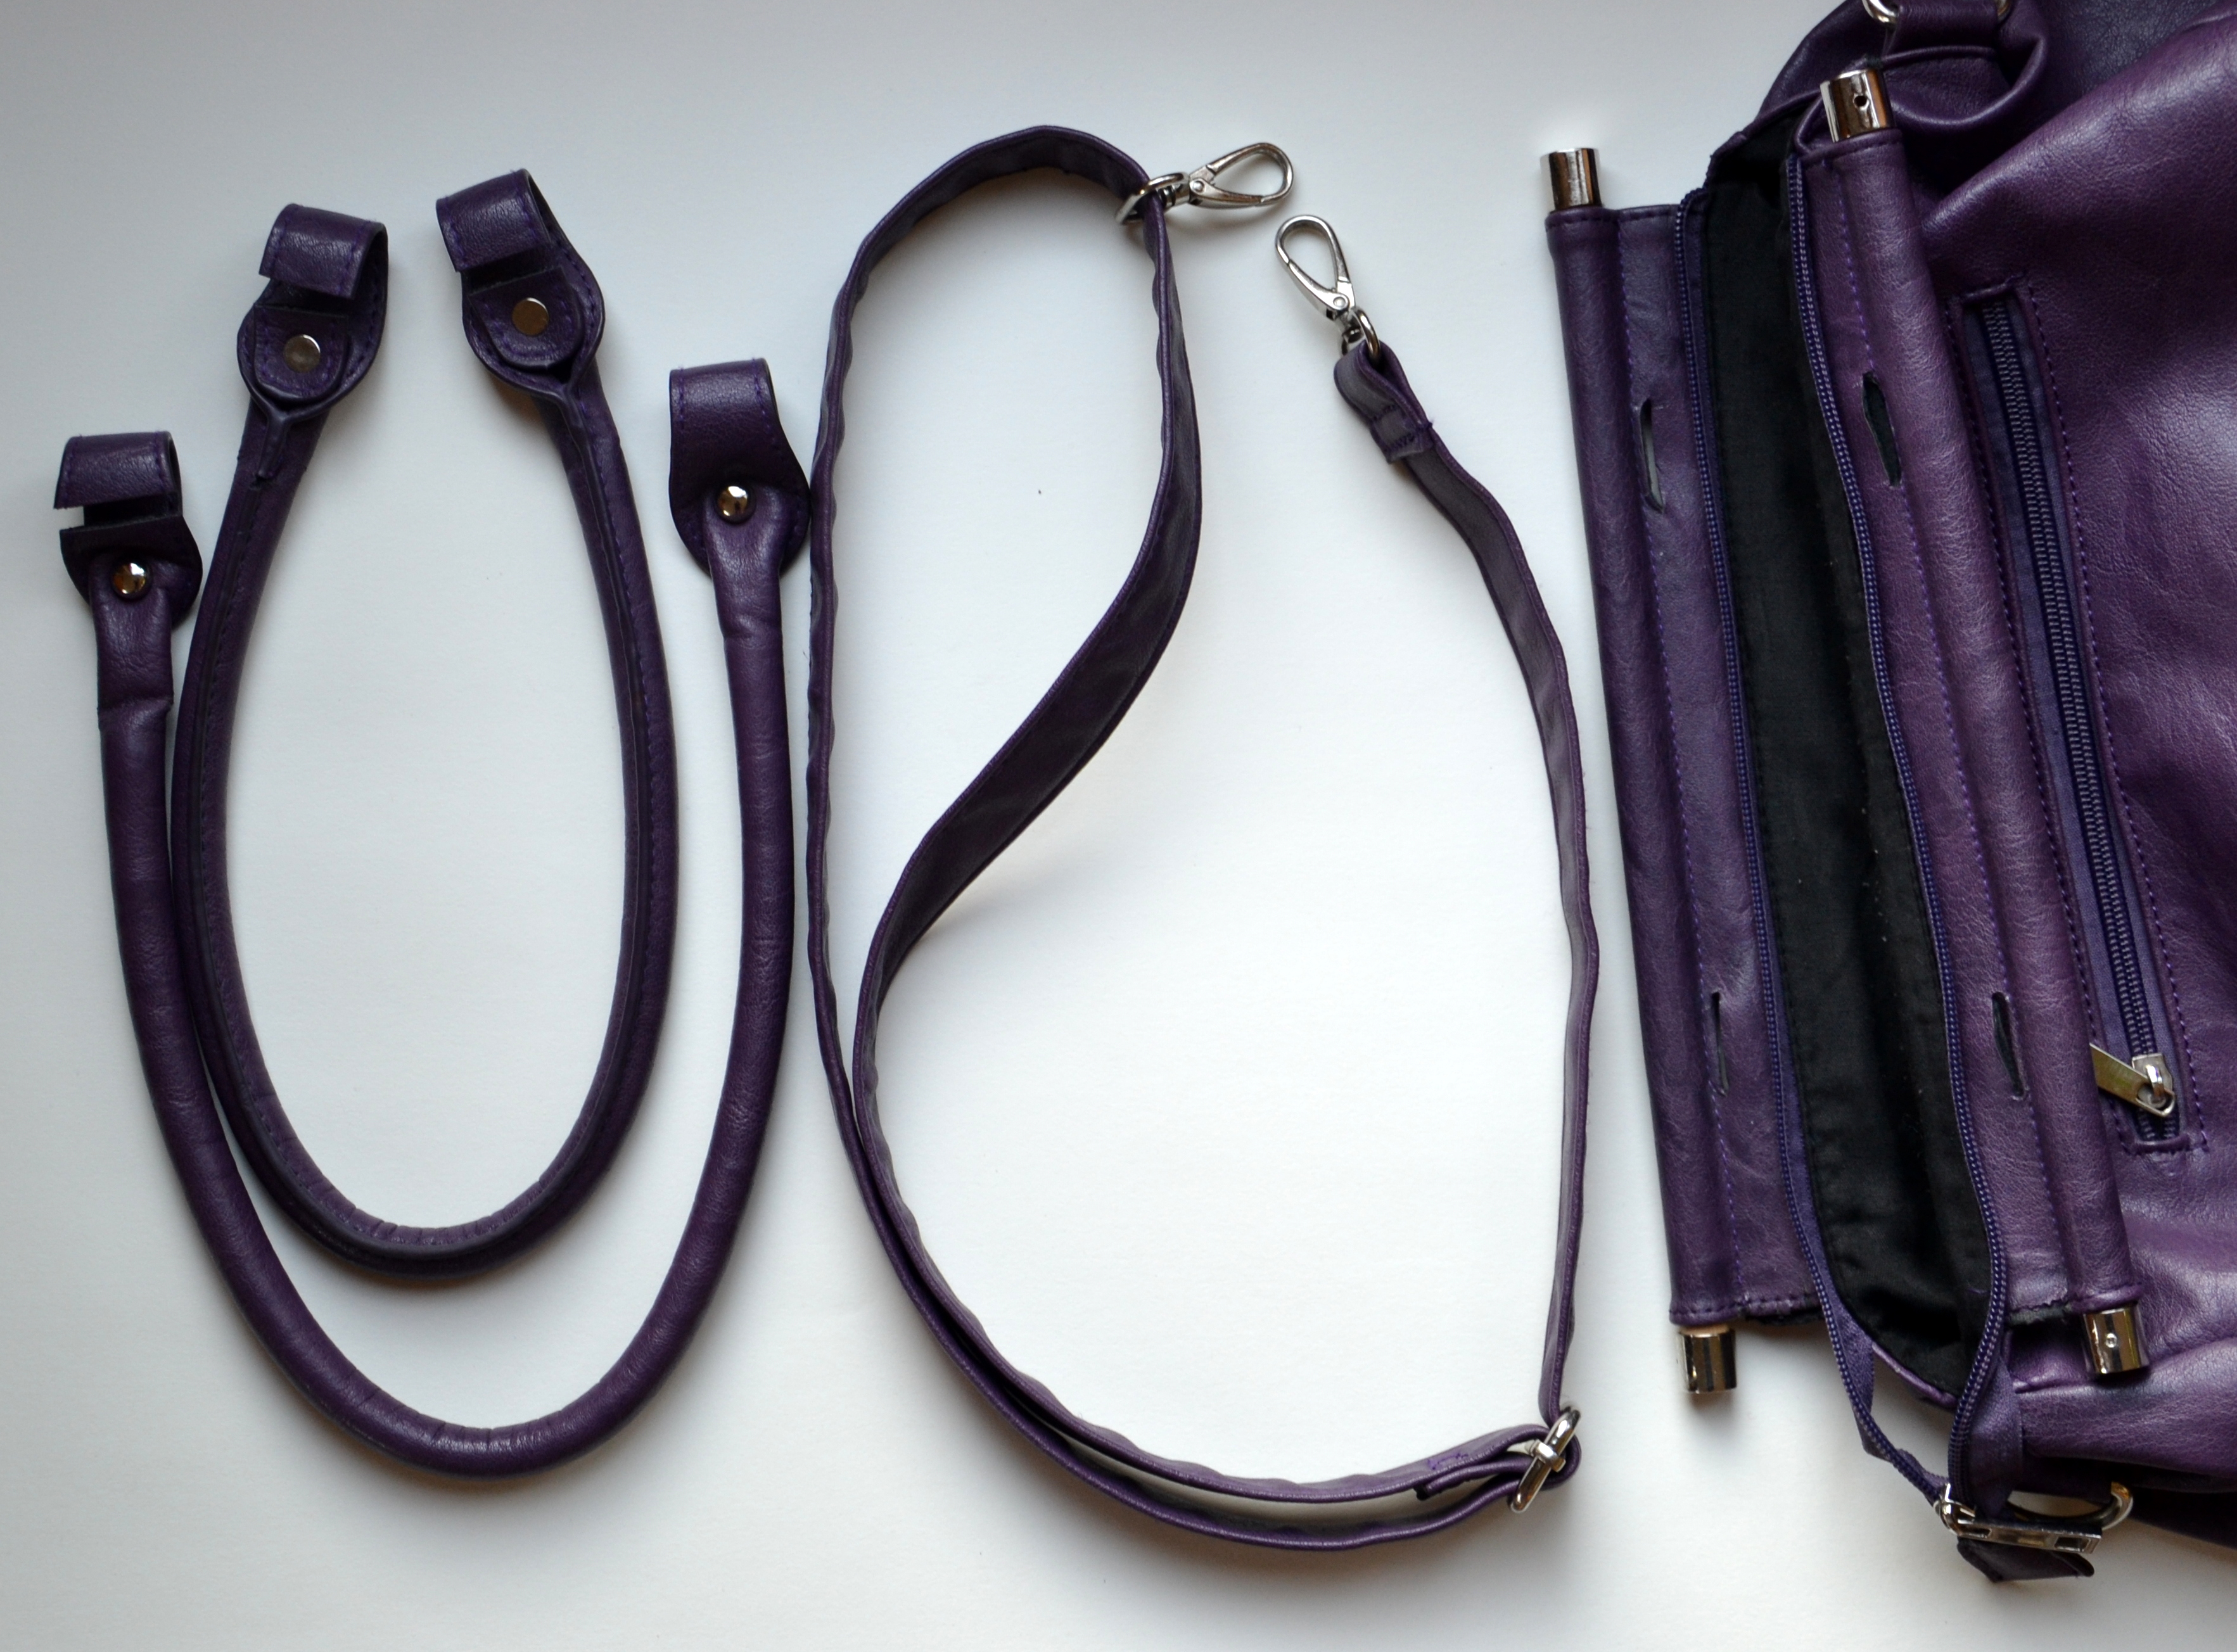 How To Fix A Broken Leather Purse Straps | Confederated Tribes of the Umatilla Indian Reservation